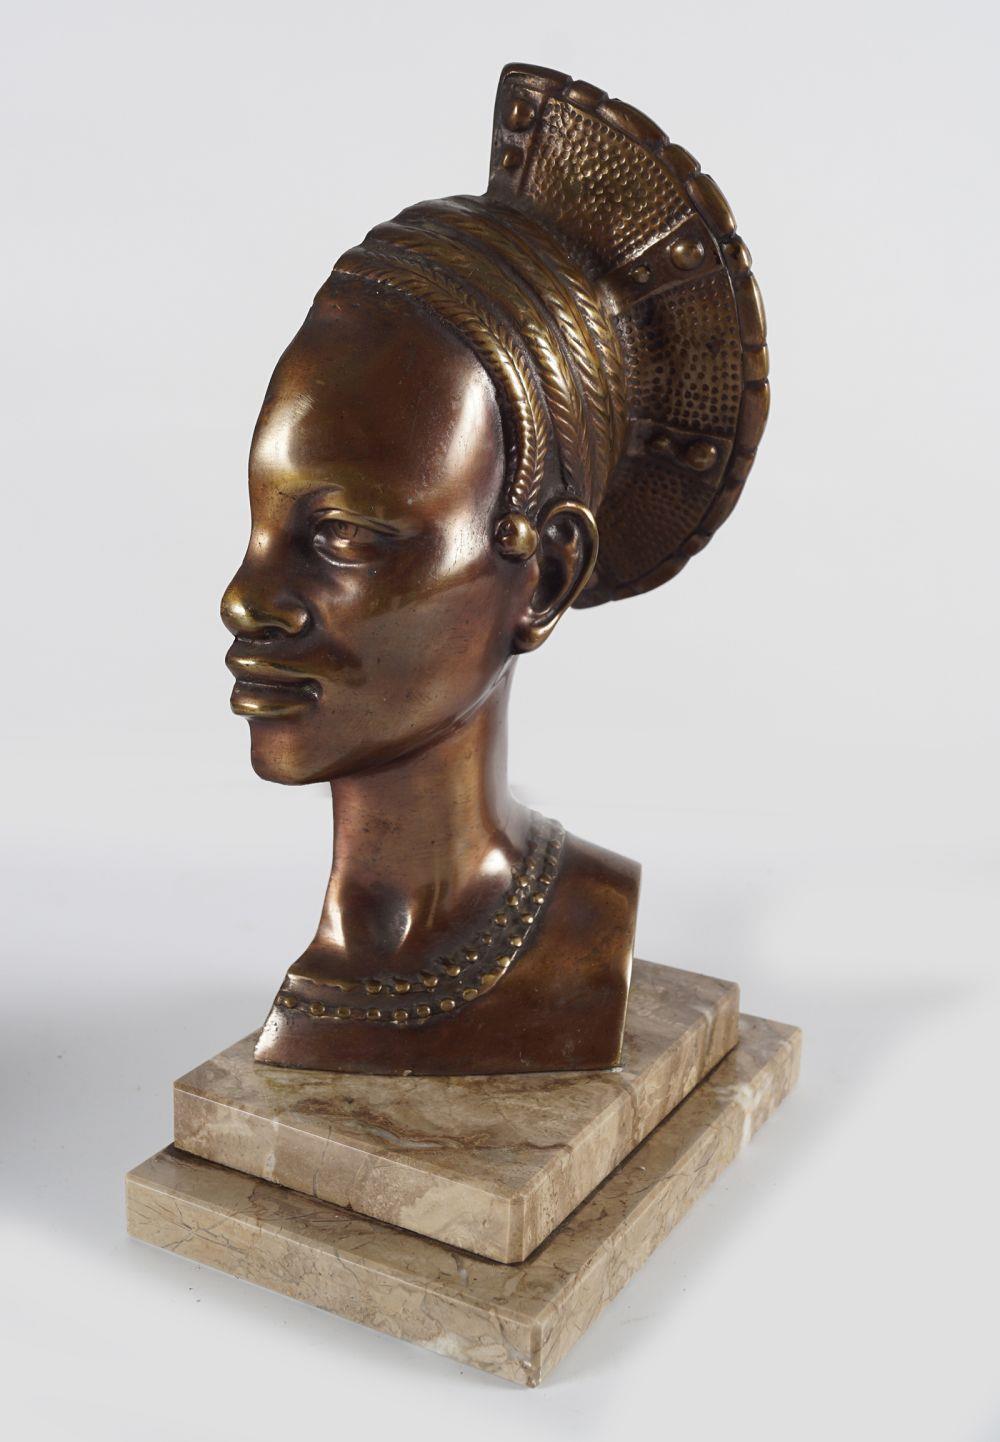 EARLY 20TH-CENTURY BRONZE SCULPTURE